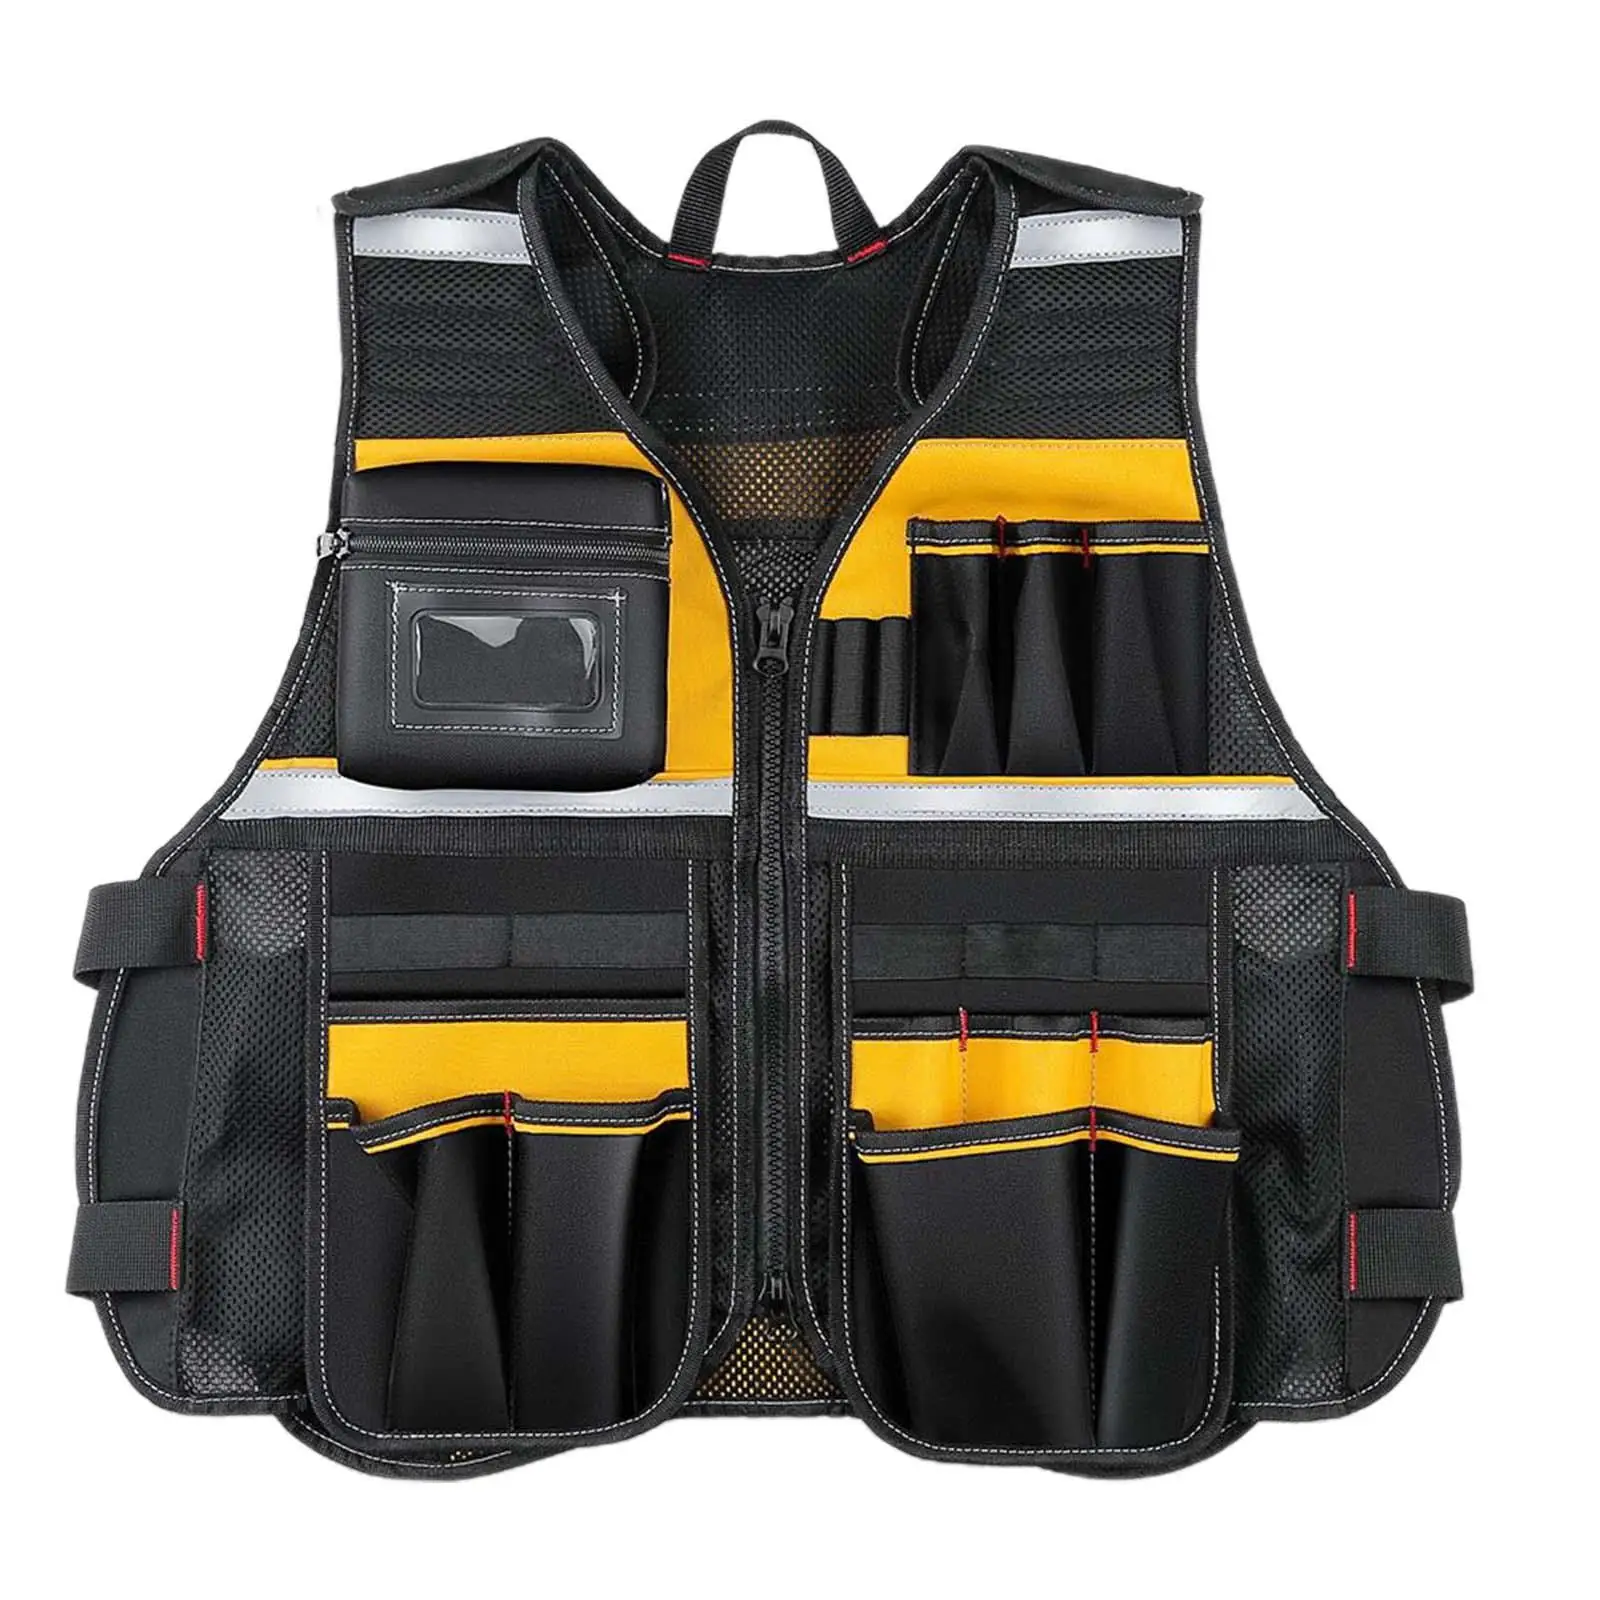 Tool Vest with Pockets Fishing Tool Pouch Universal Safety Vest Adjustable for Construction Worker Electricians Fishing Unisex